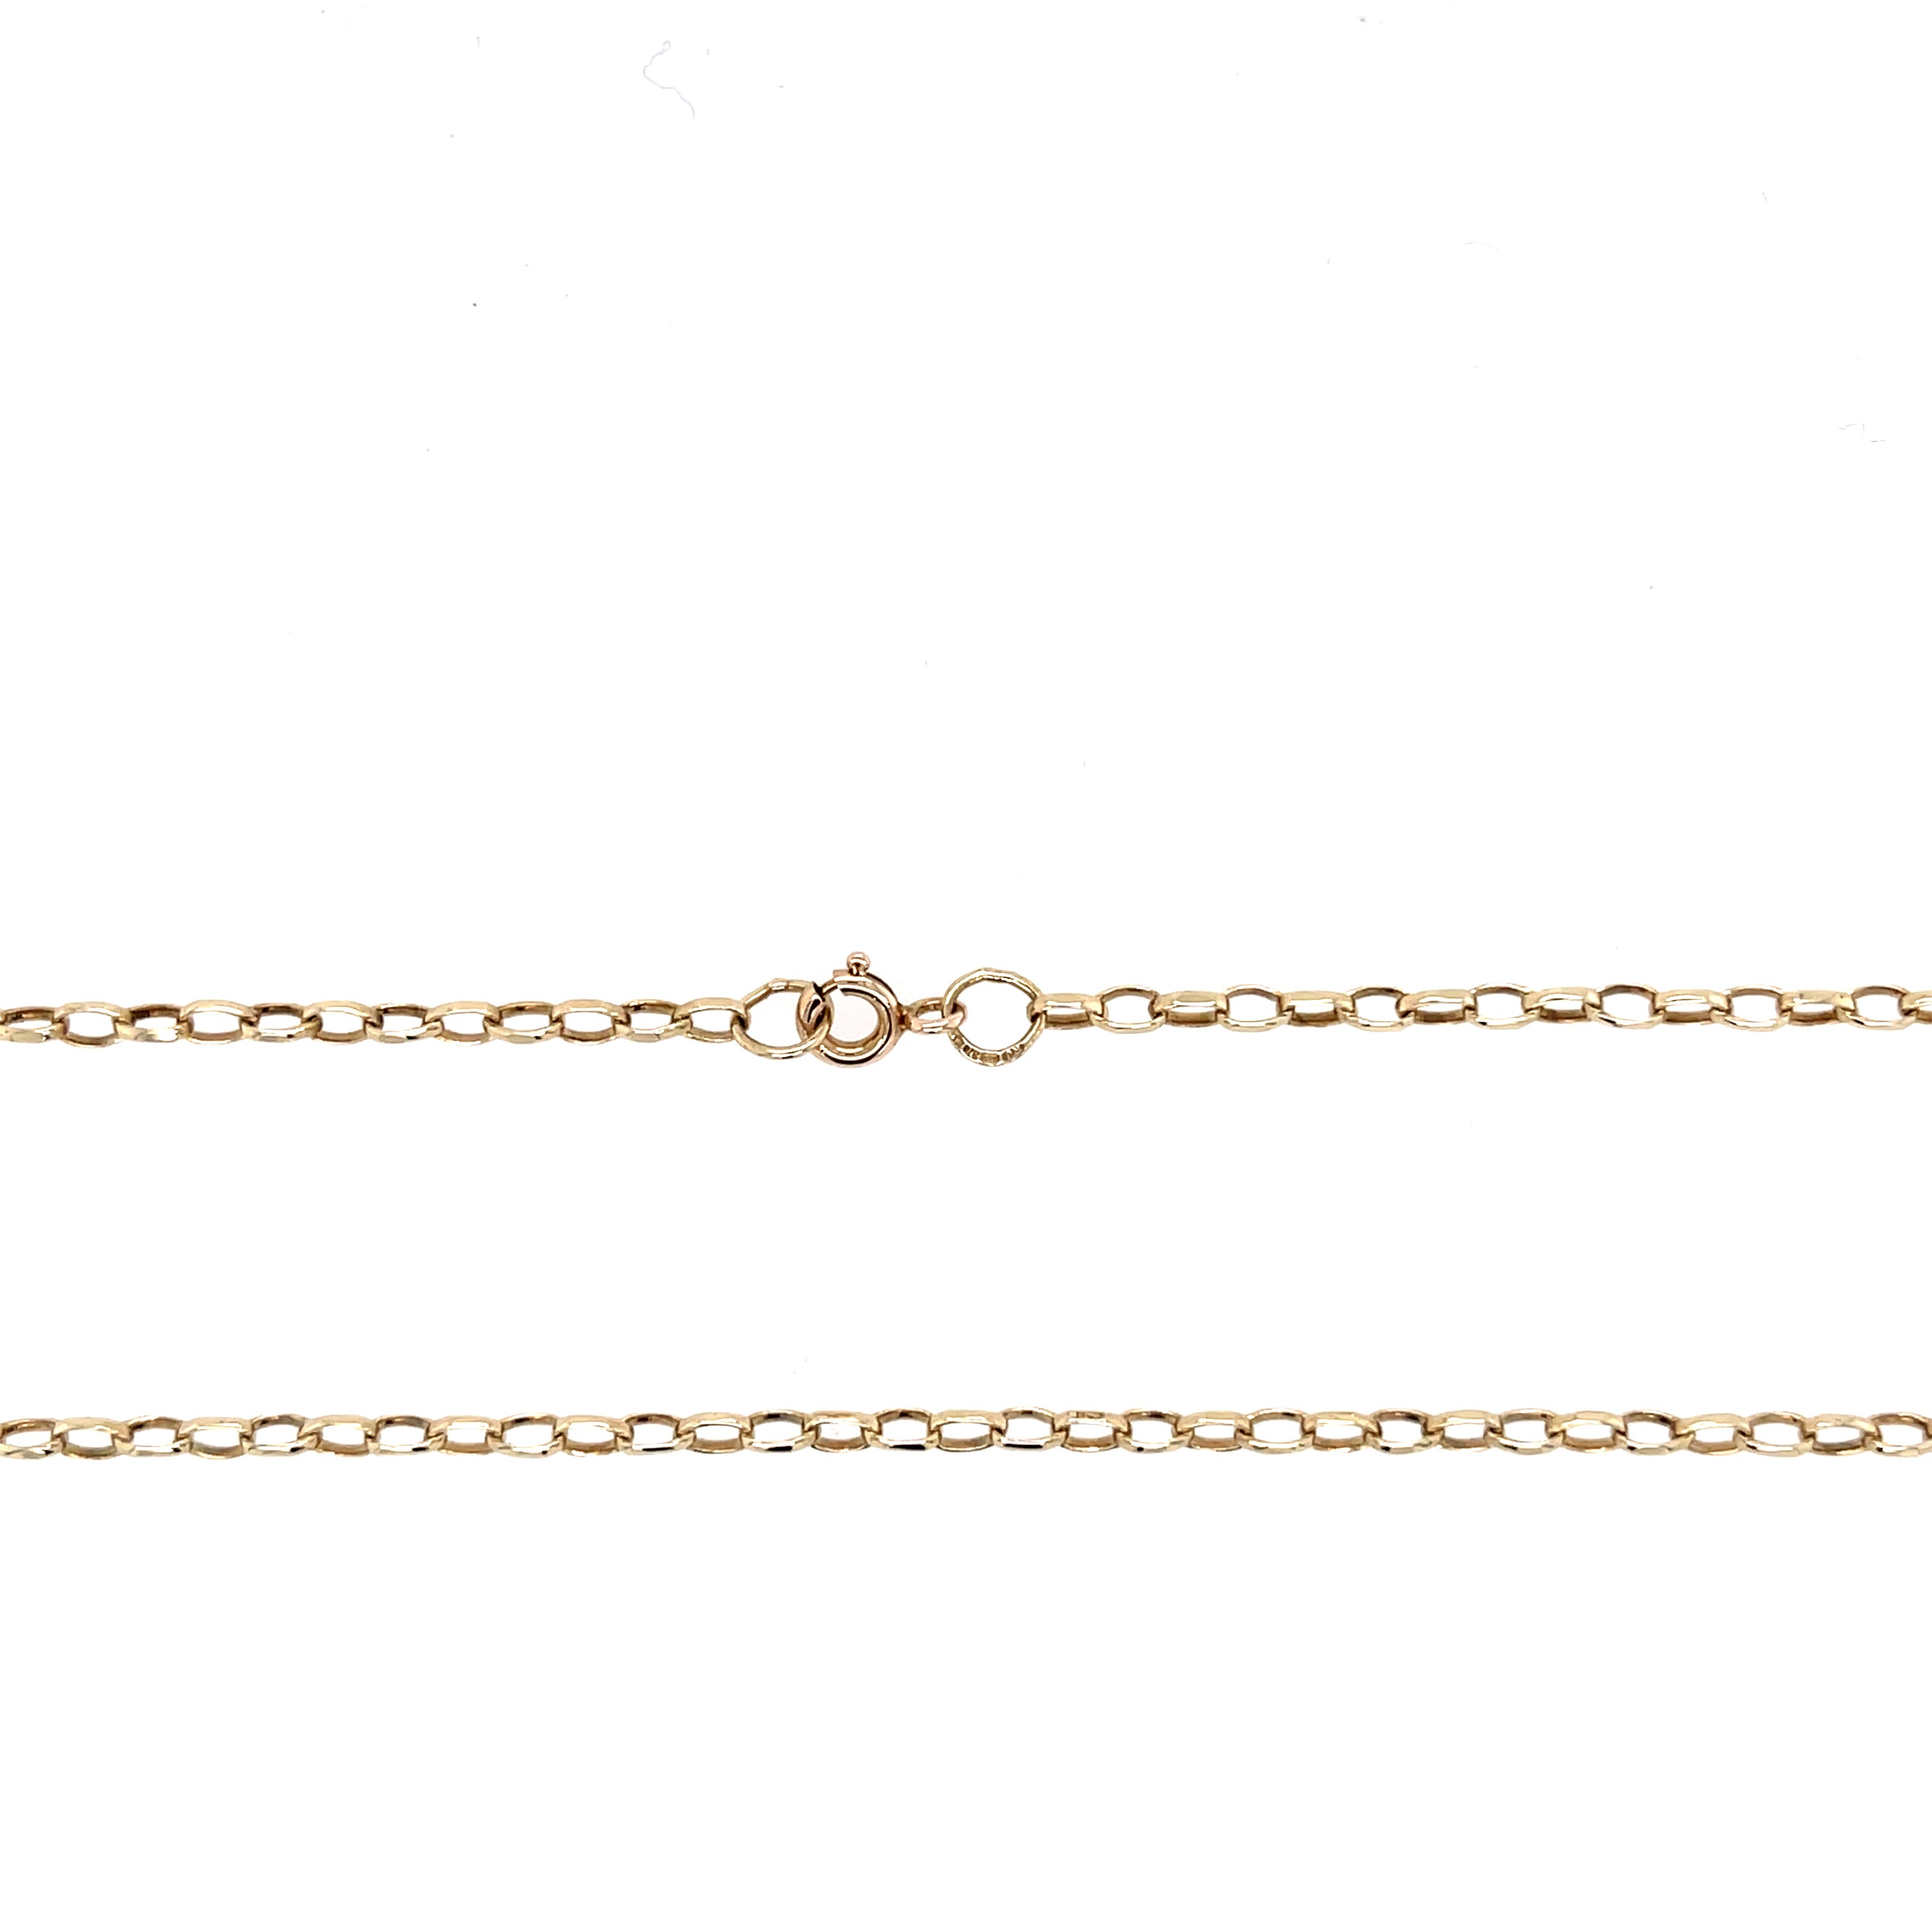 9ct Yellow Gold 18" Oval Belcher Link Chain - 3.82g SOLD